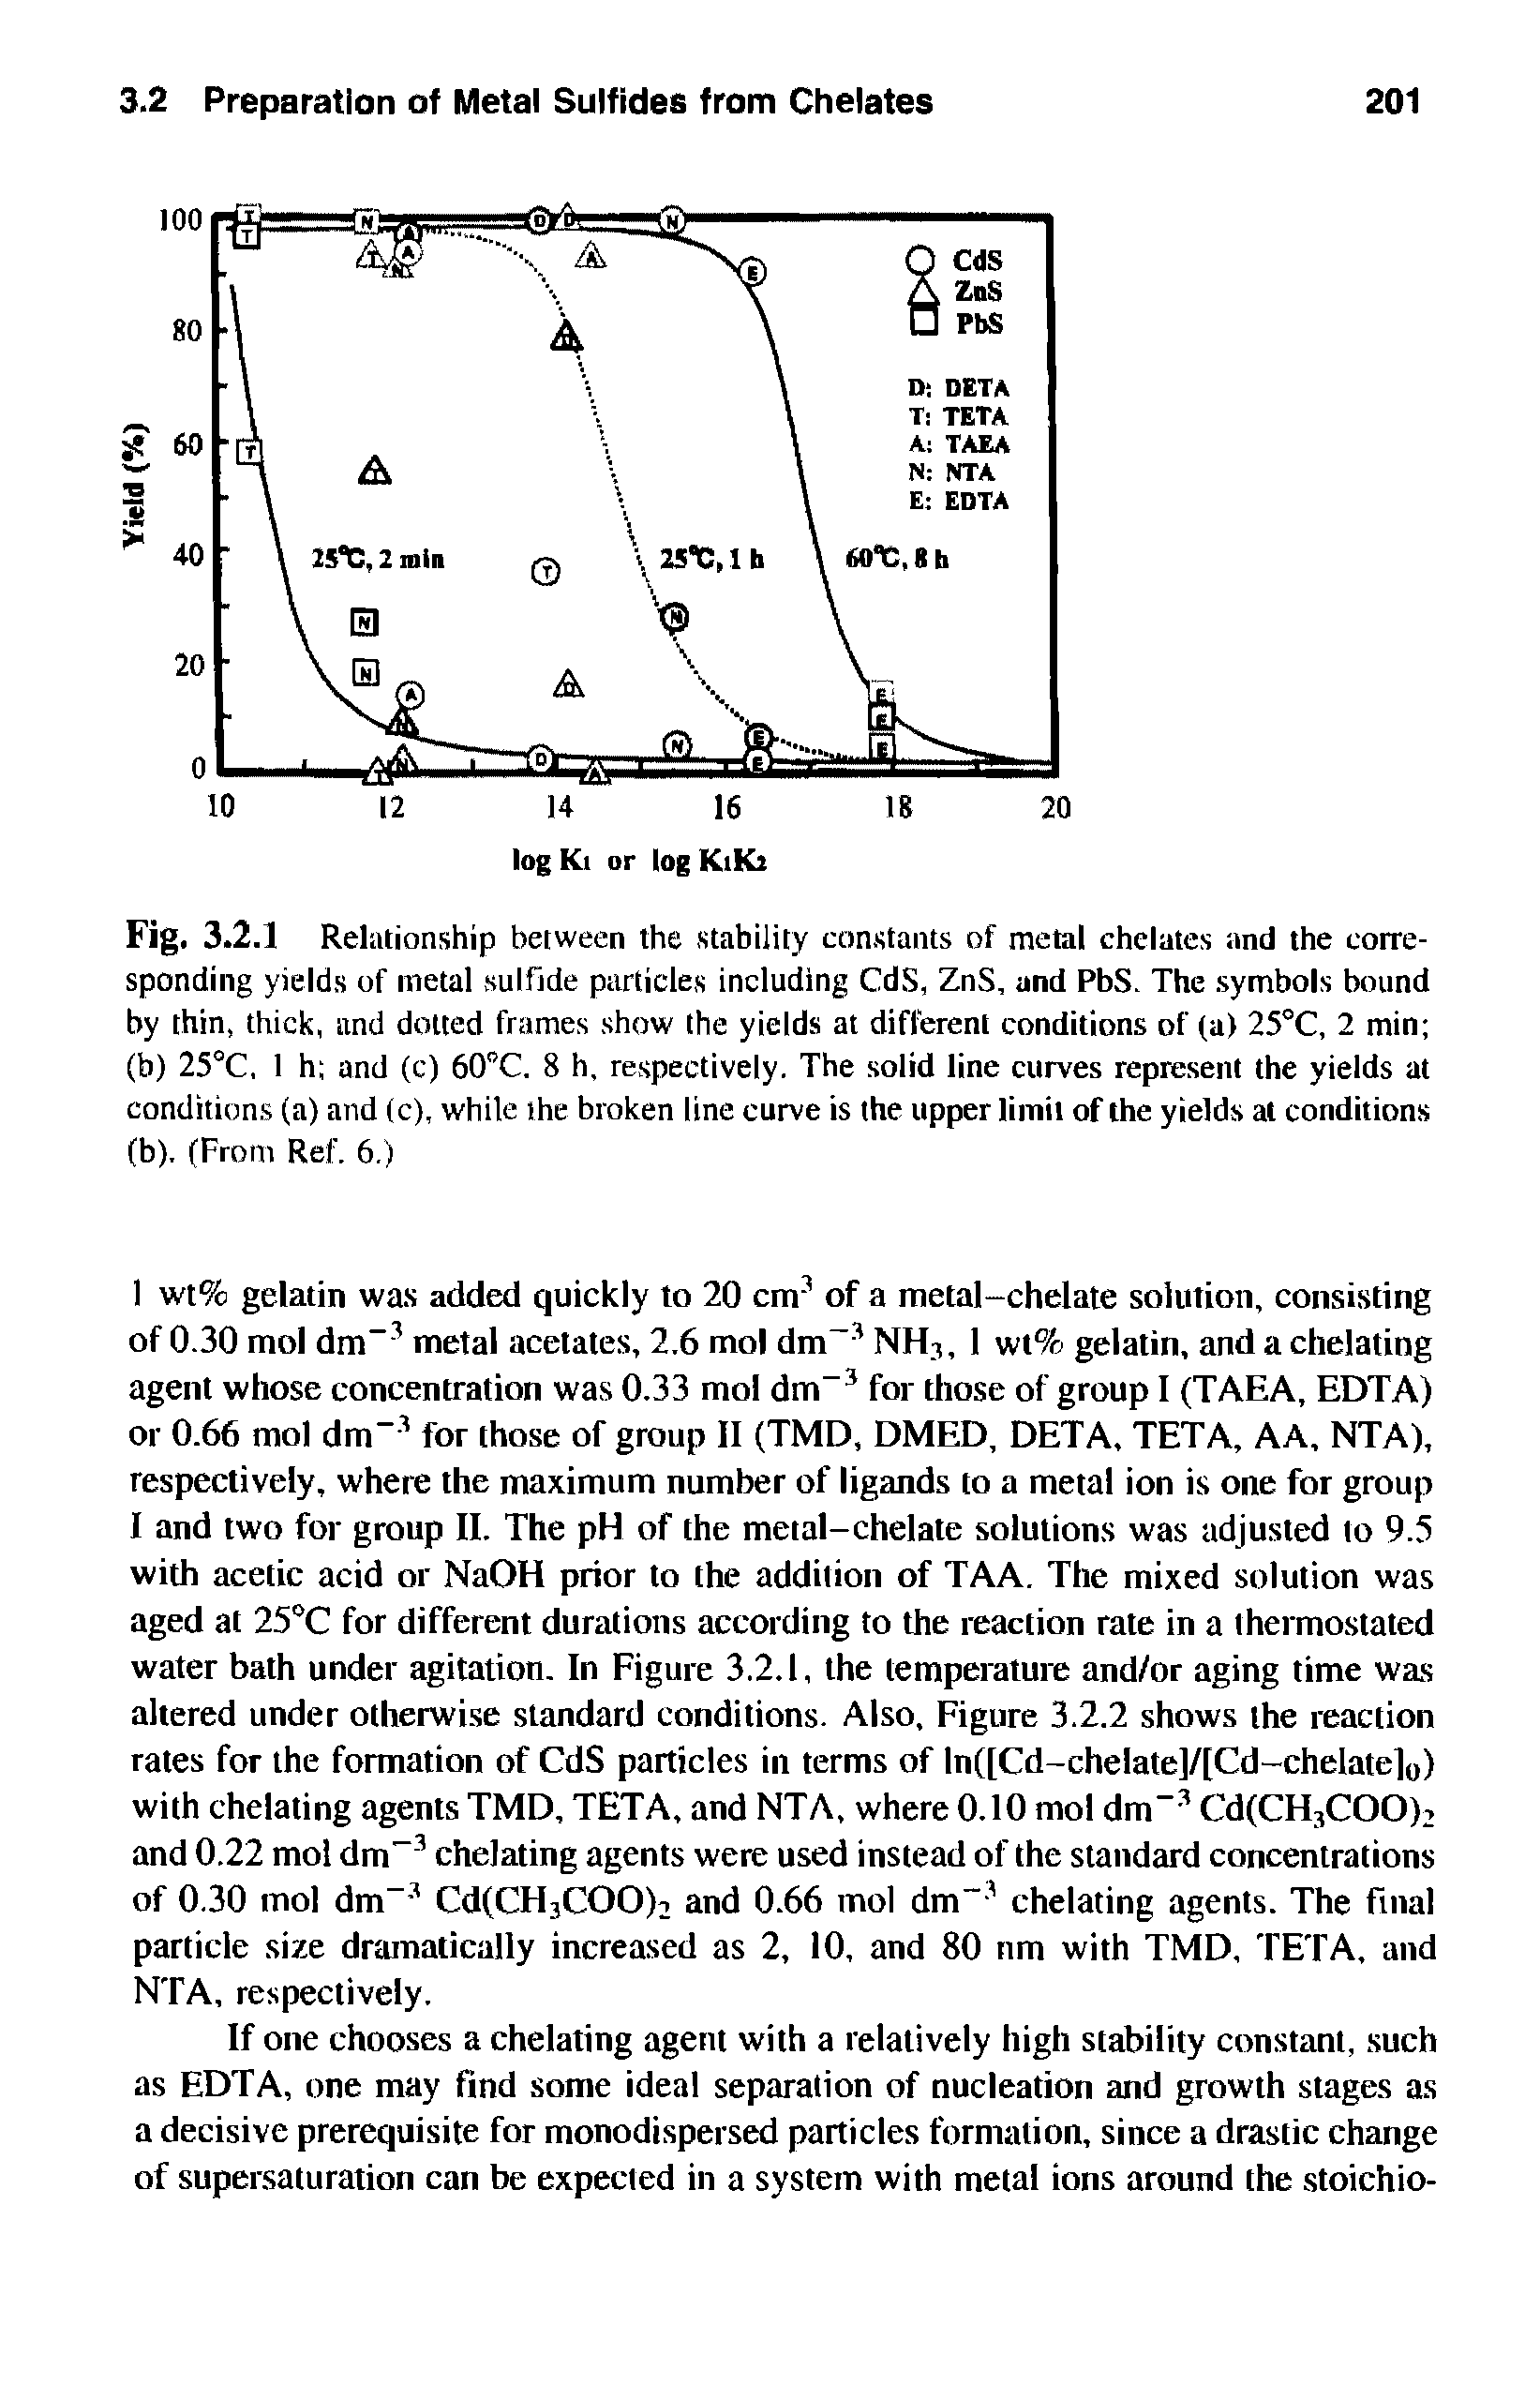 Fig. 3.2.1 Relationship between the stability constants of metal chelates and the corresponding yields of metal sulfide particles including CdS, ZnS, and PbS. The symbols bound by thin, thick, and dotted frames show the yields at different conditions of (a) 25°C, 2 min (b) 25°C, 1 h and (c) 60r C. 8 h, respectively. The solid line curves represent the yields at conditions (a) and (c), while the broken line curve is the upper limit of the yields at conditions (b). (From Ref. 6.)...